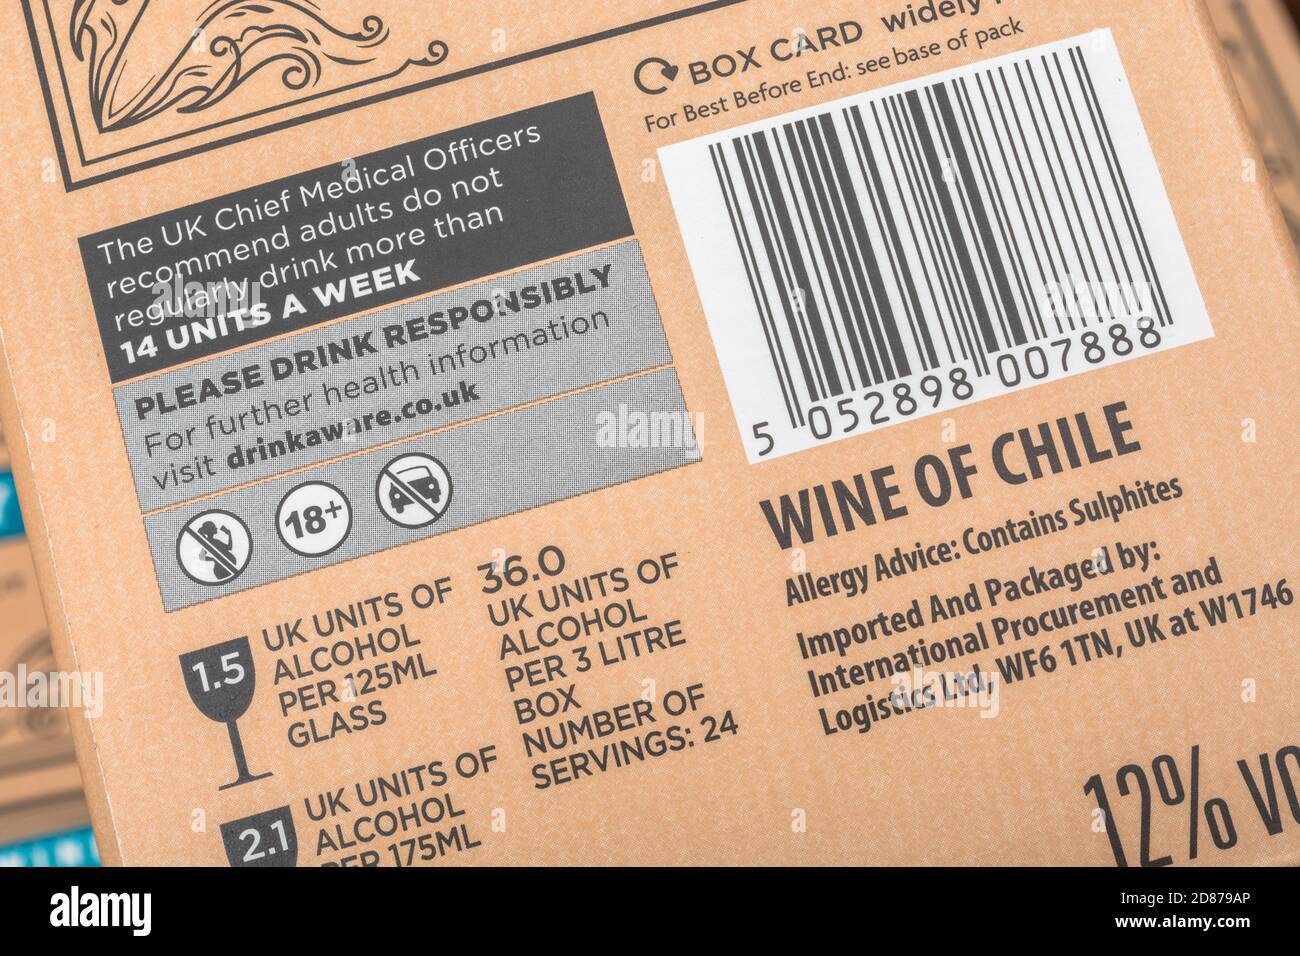 Boxed white wine from ASDA with alcohol units label / alcohol awareness label. Packed by International Procurement & Logistics Ltd. - part of ASDA. Stock Photo